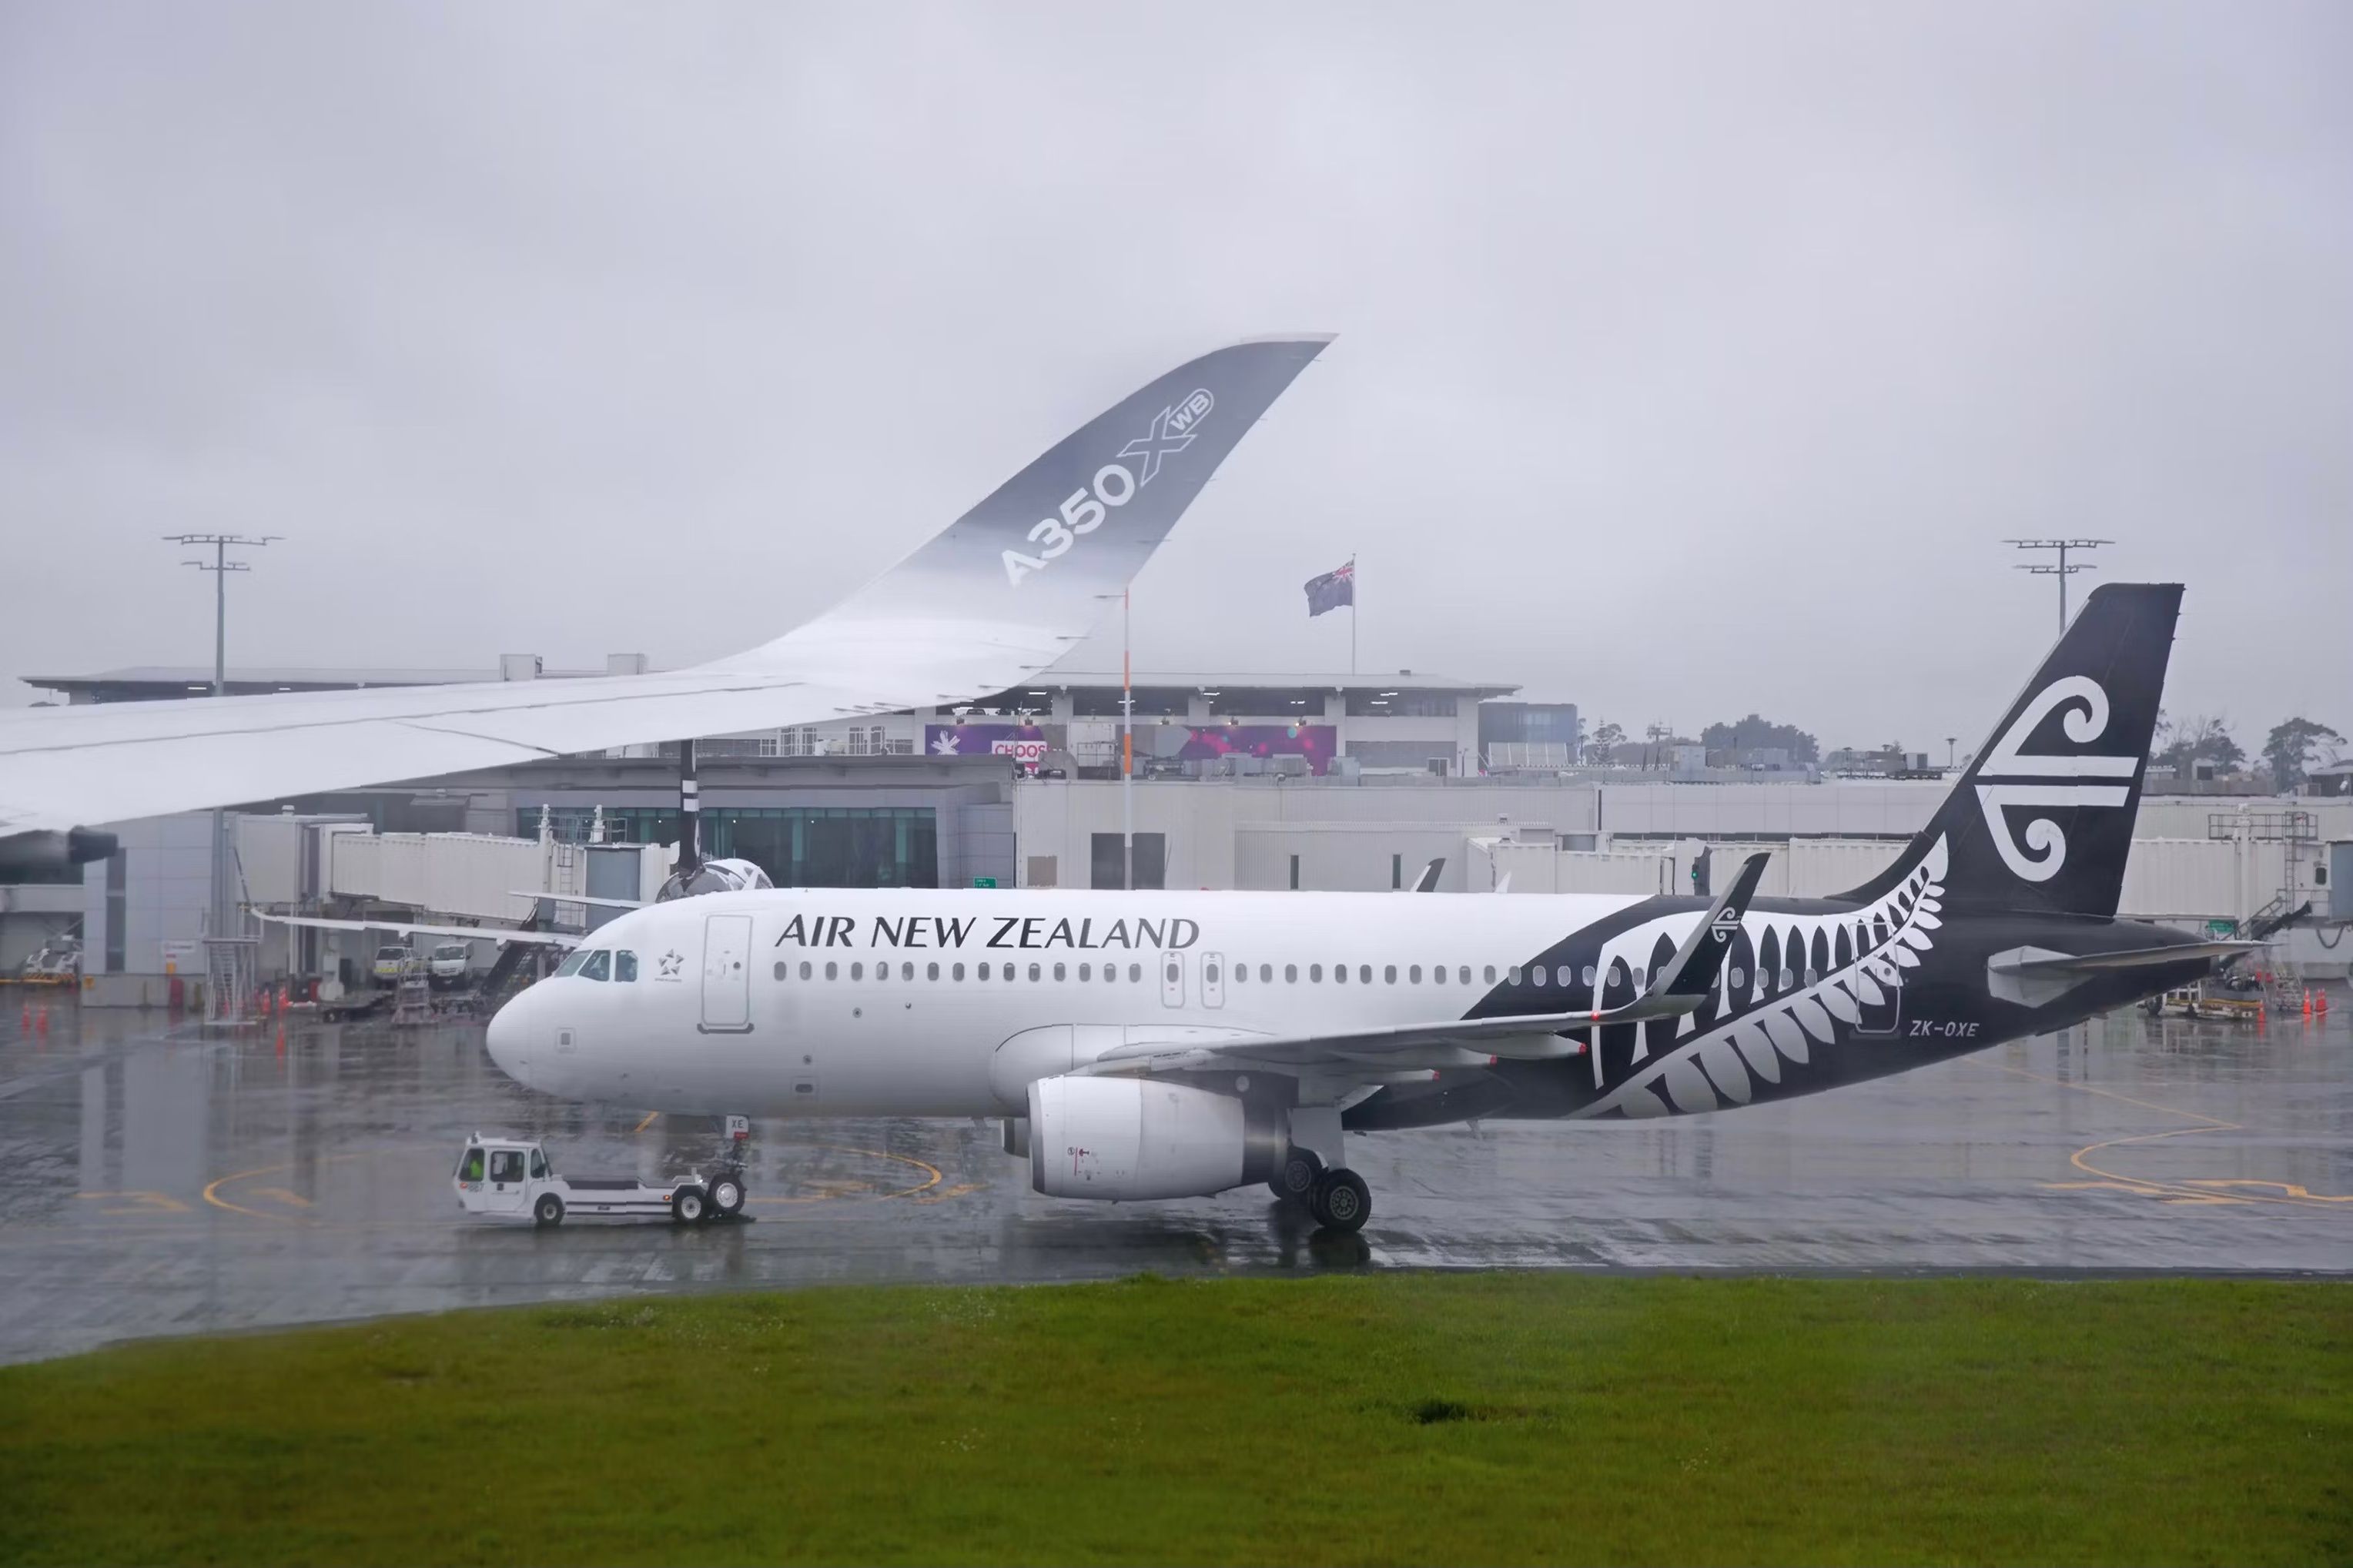 An Air New Zealand Airbus A320 on the apron at Auckland Airport.